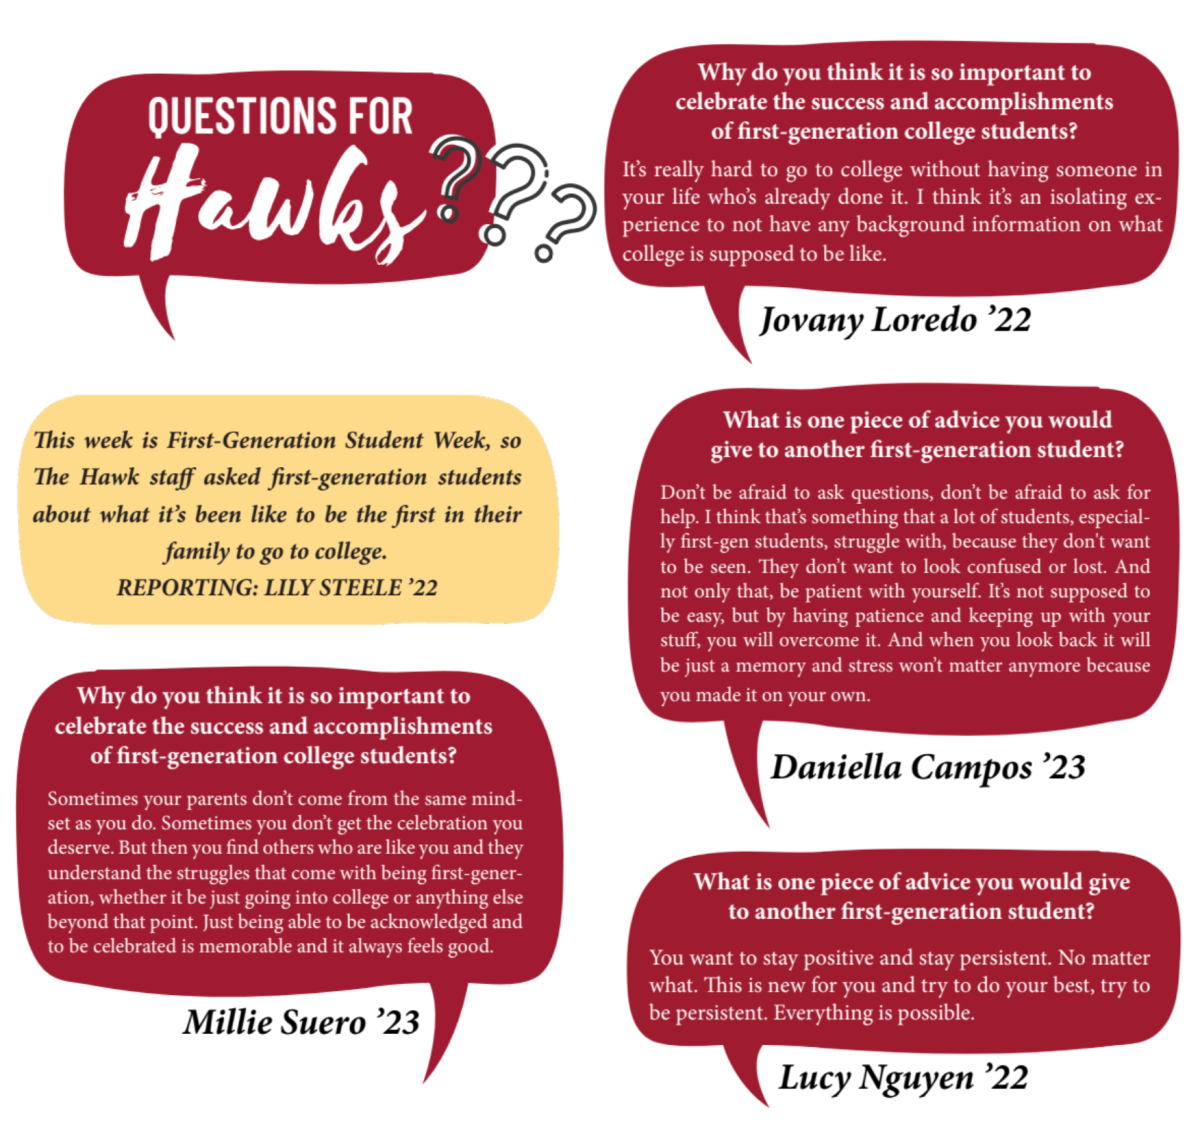 Questions for Hawks: First generation students